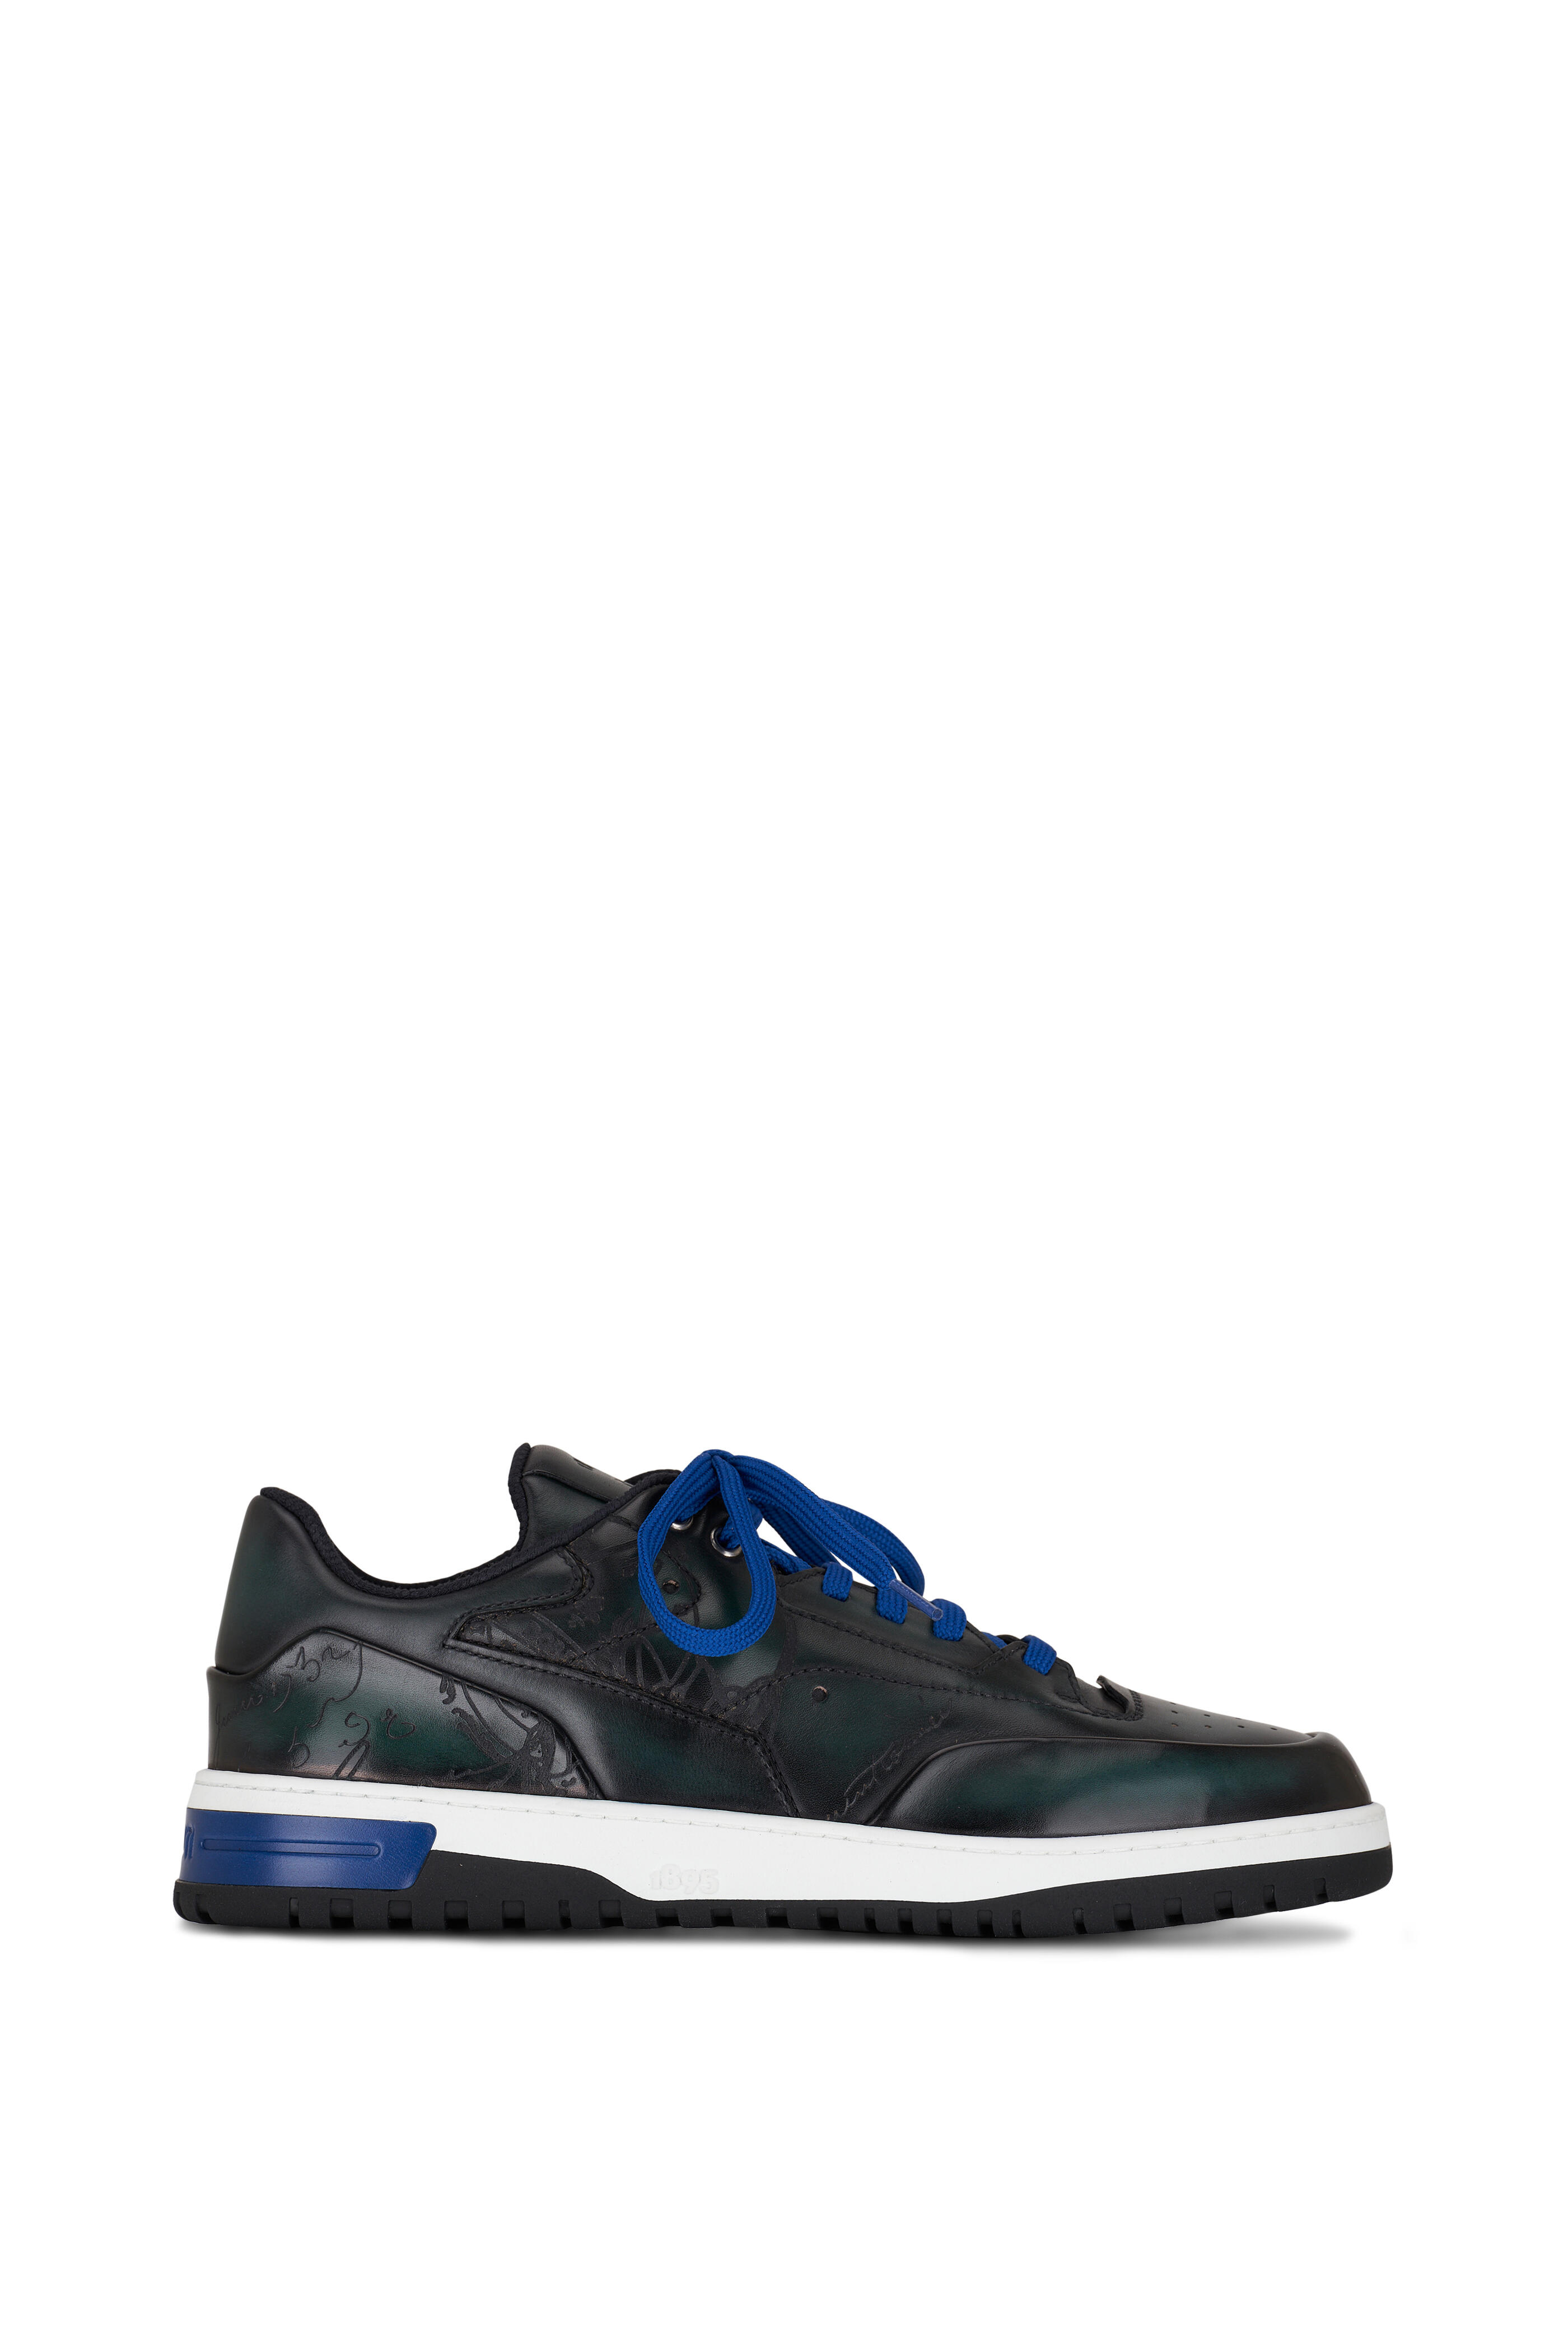 Playoff Low Top Leather Sneakers in Black - Berluti